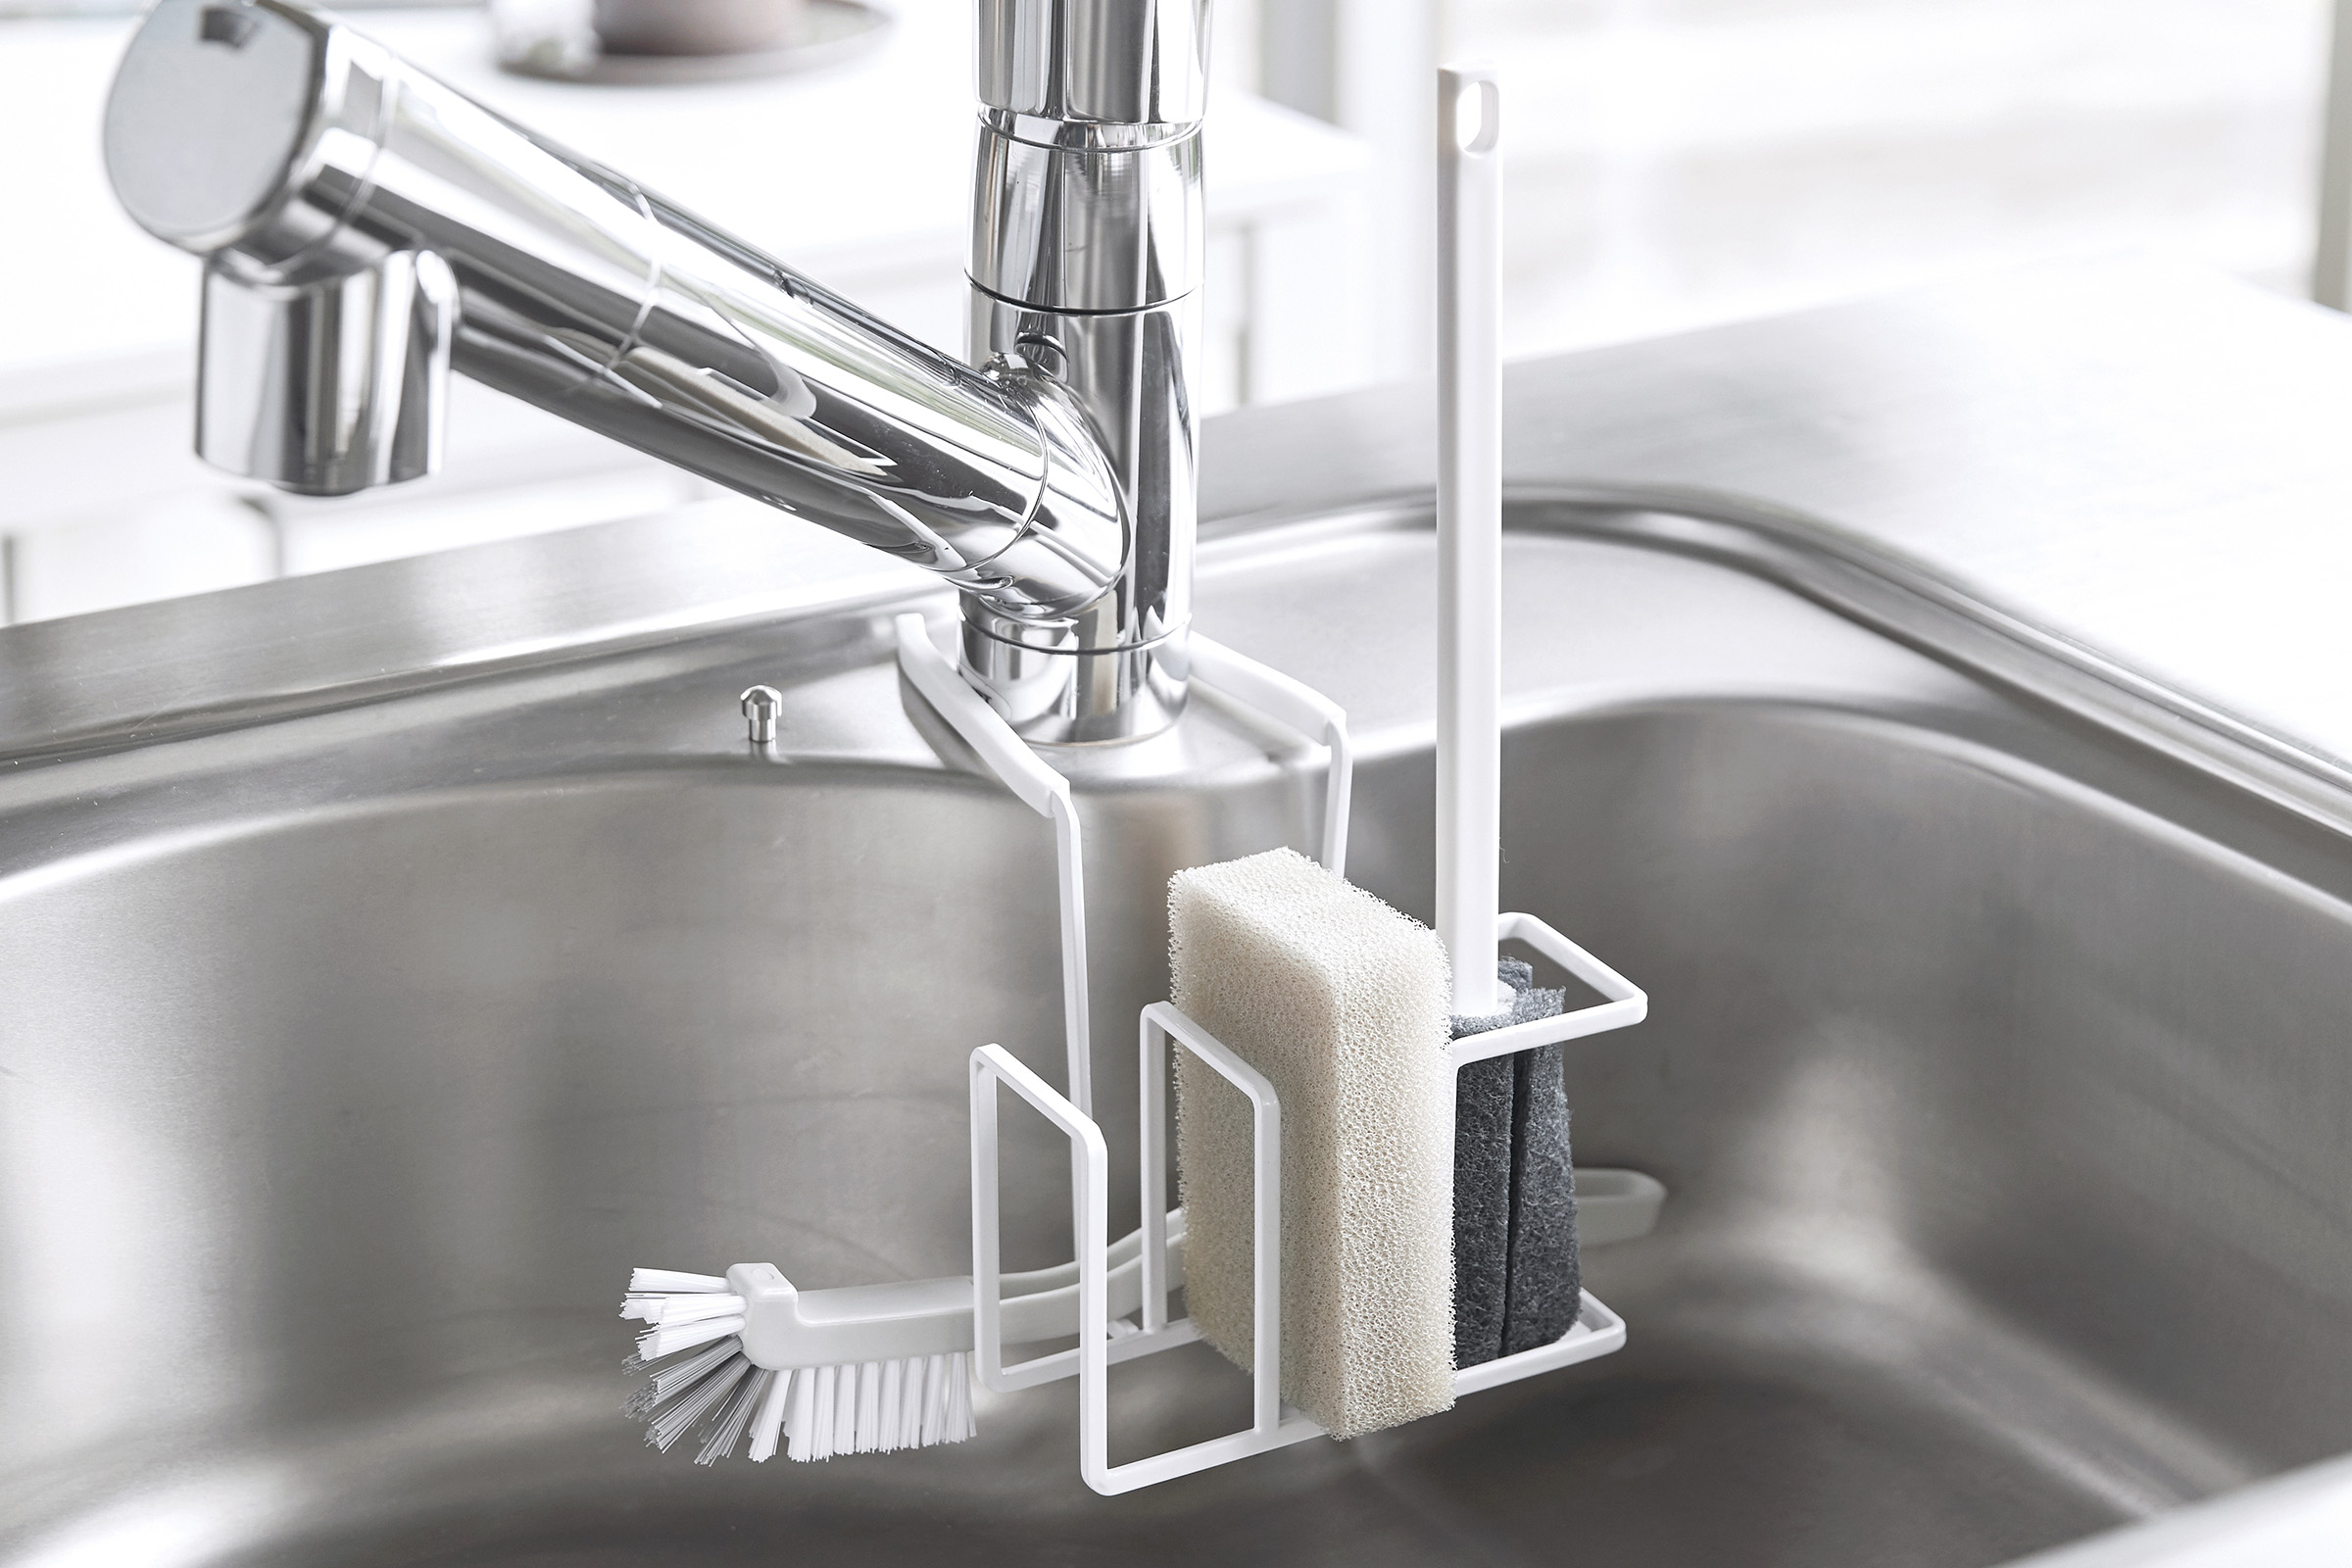 Faucet-Hanging Sponge & Brush Holder by Yamazaki Home in white holding several cleaning tools.